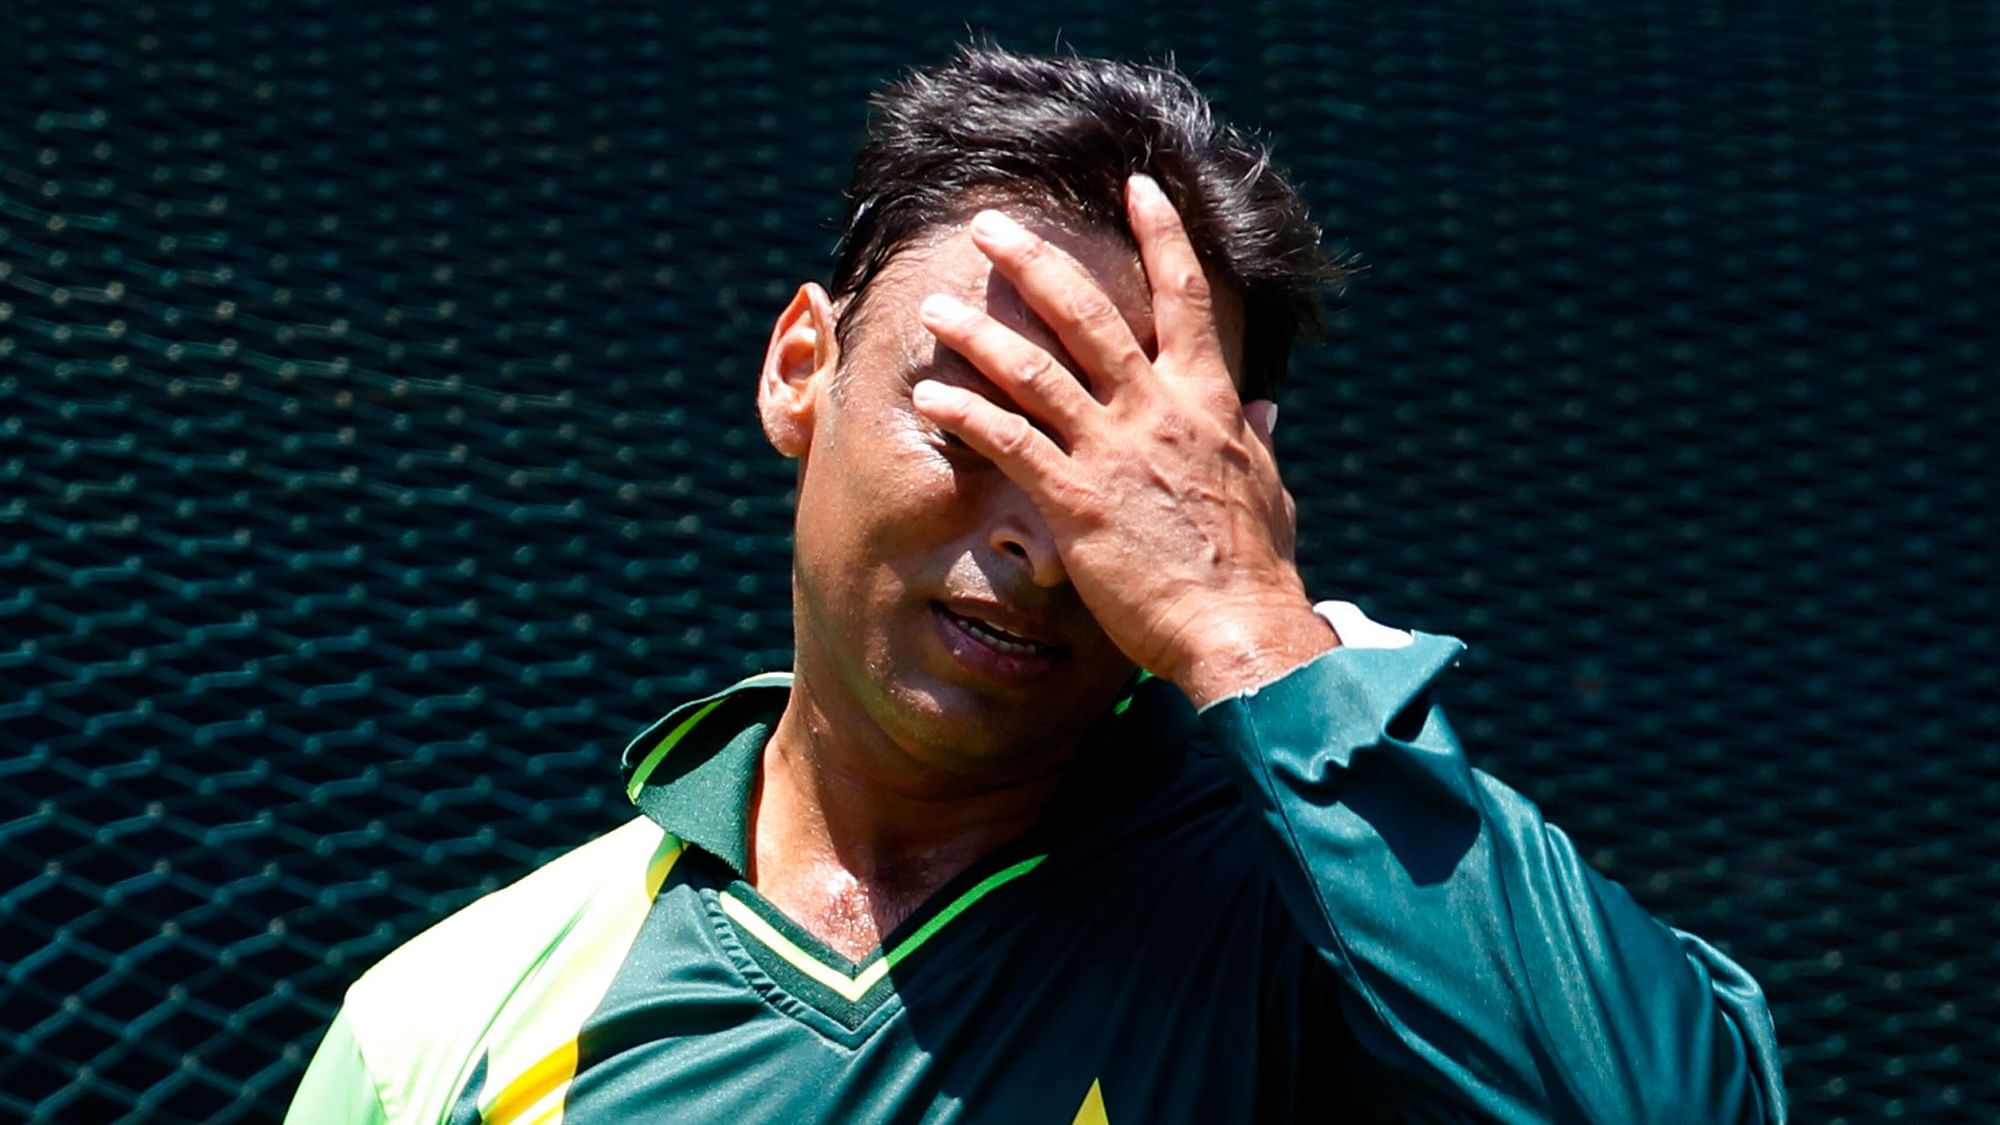 Shoaib Akhtar has revealed his “sad secret” about the 2003 World Cup match against India which his team lost by six wickets.